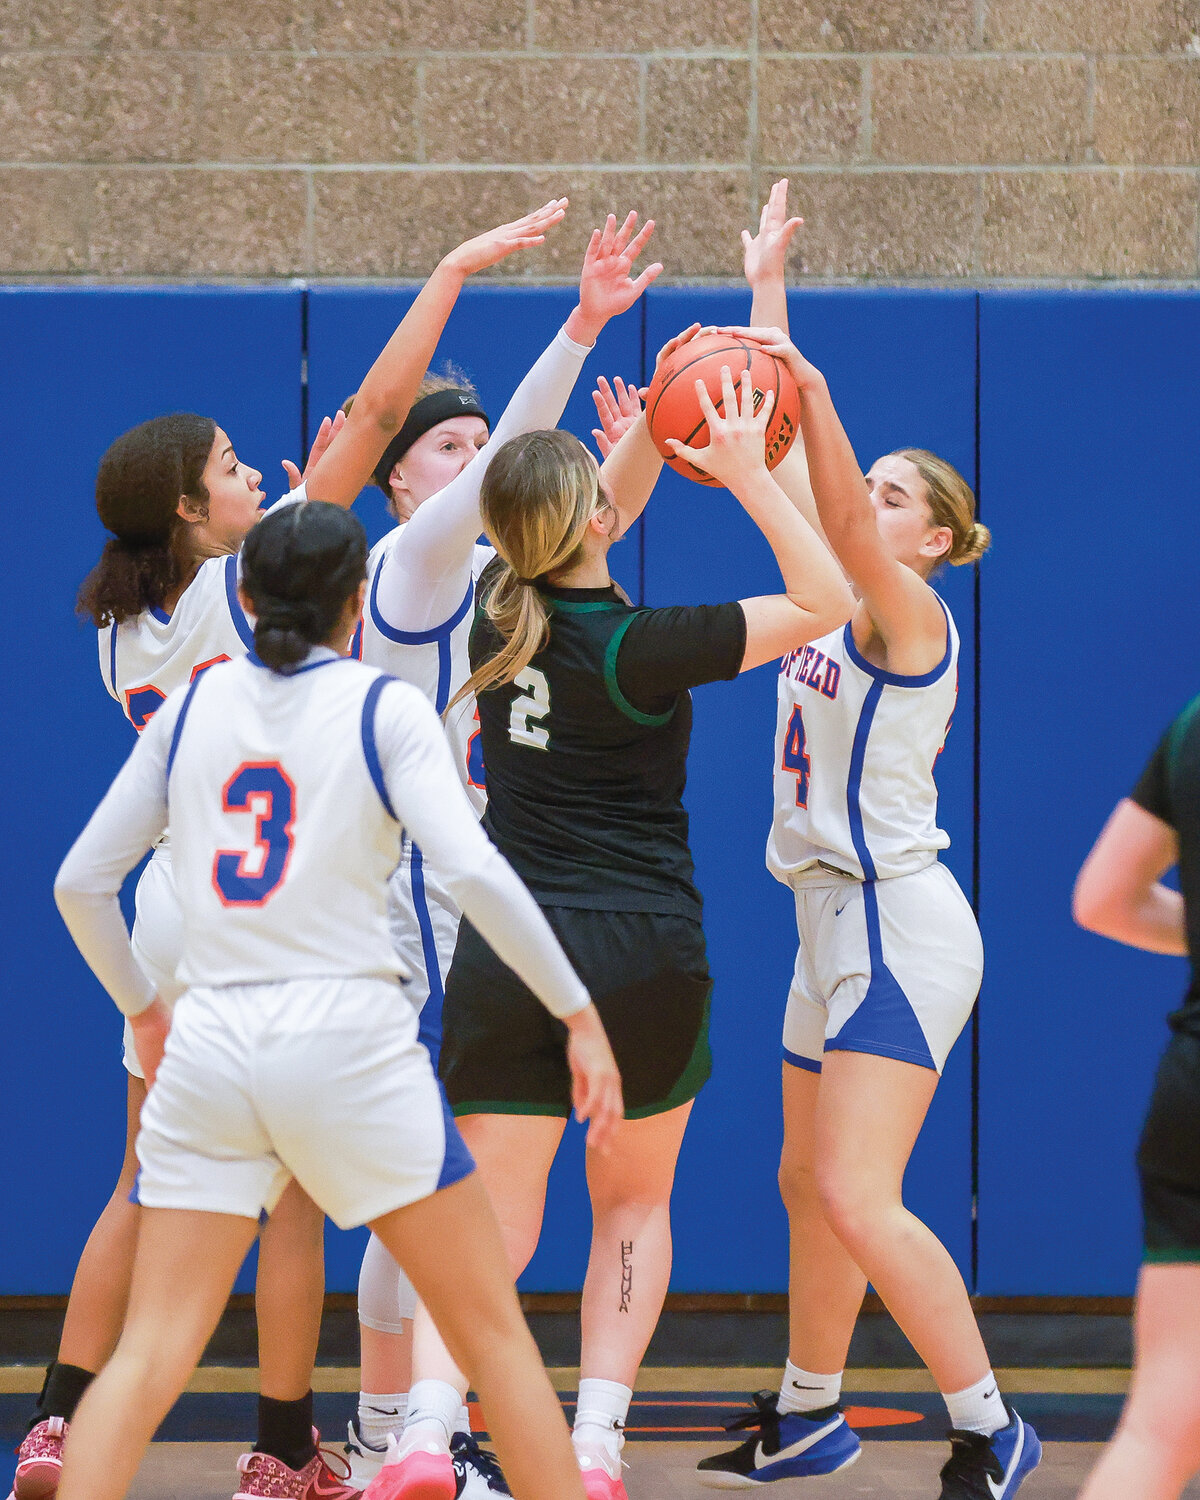 A swarm of Ridgefield defenders go to block a shot by Woodland’s Kennedy Bockert, who scored 19 of the Beavers’ 35 points in their 60-35 loss to the Spudders on Tuesday, Jan. 9.